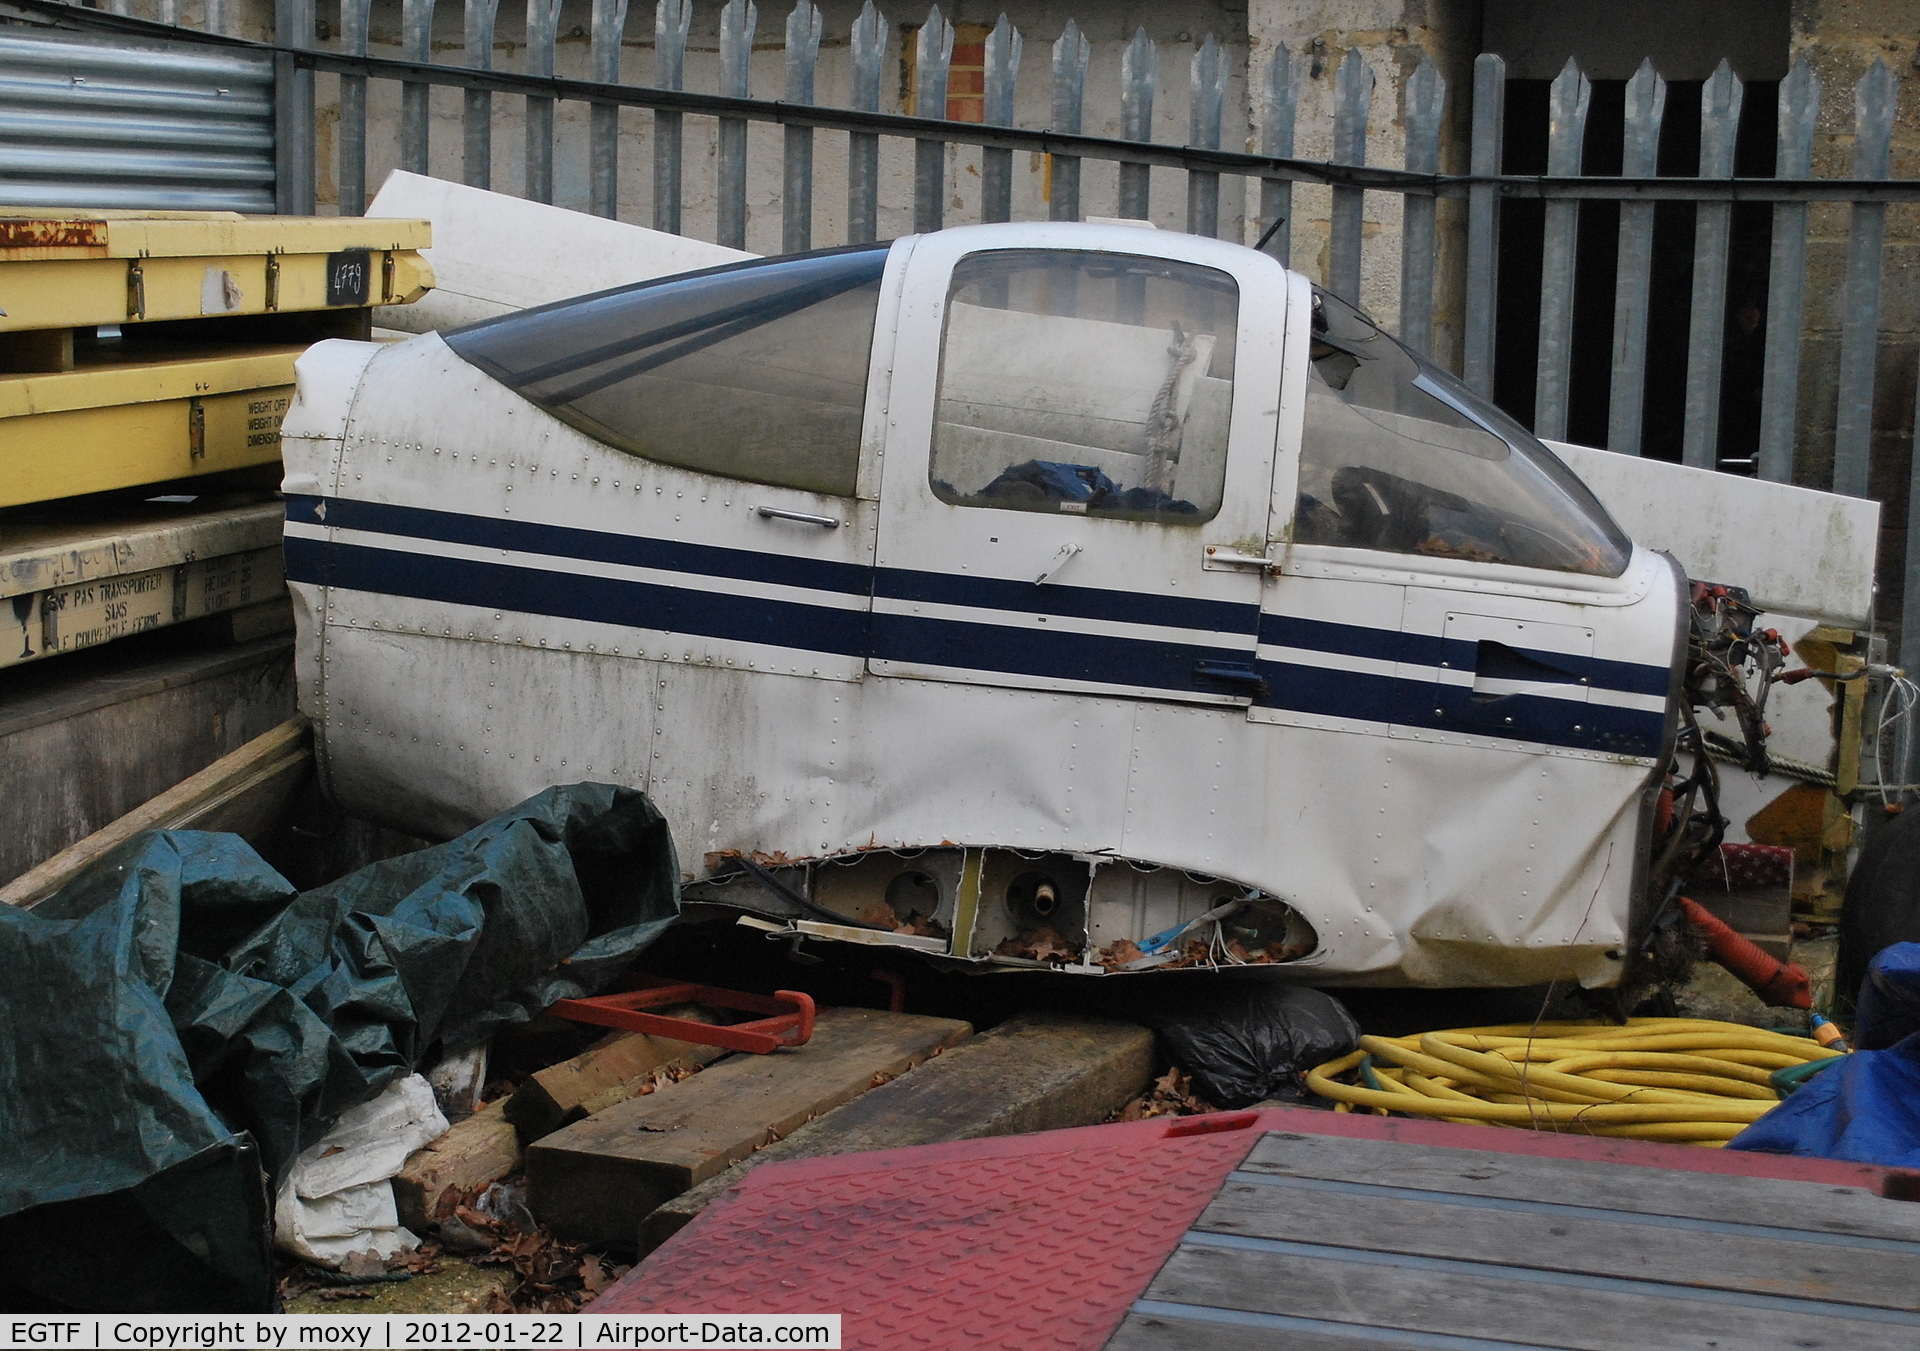 Fairoaks Airport, Chobham, England United Kingdom (EGTF) - Unidentified PA-38 Tomahawk section in the compound at Fairoaks. The wings behind are from Cirrus SR22 G-TAAA which crashed at Denham.